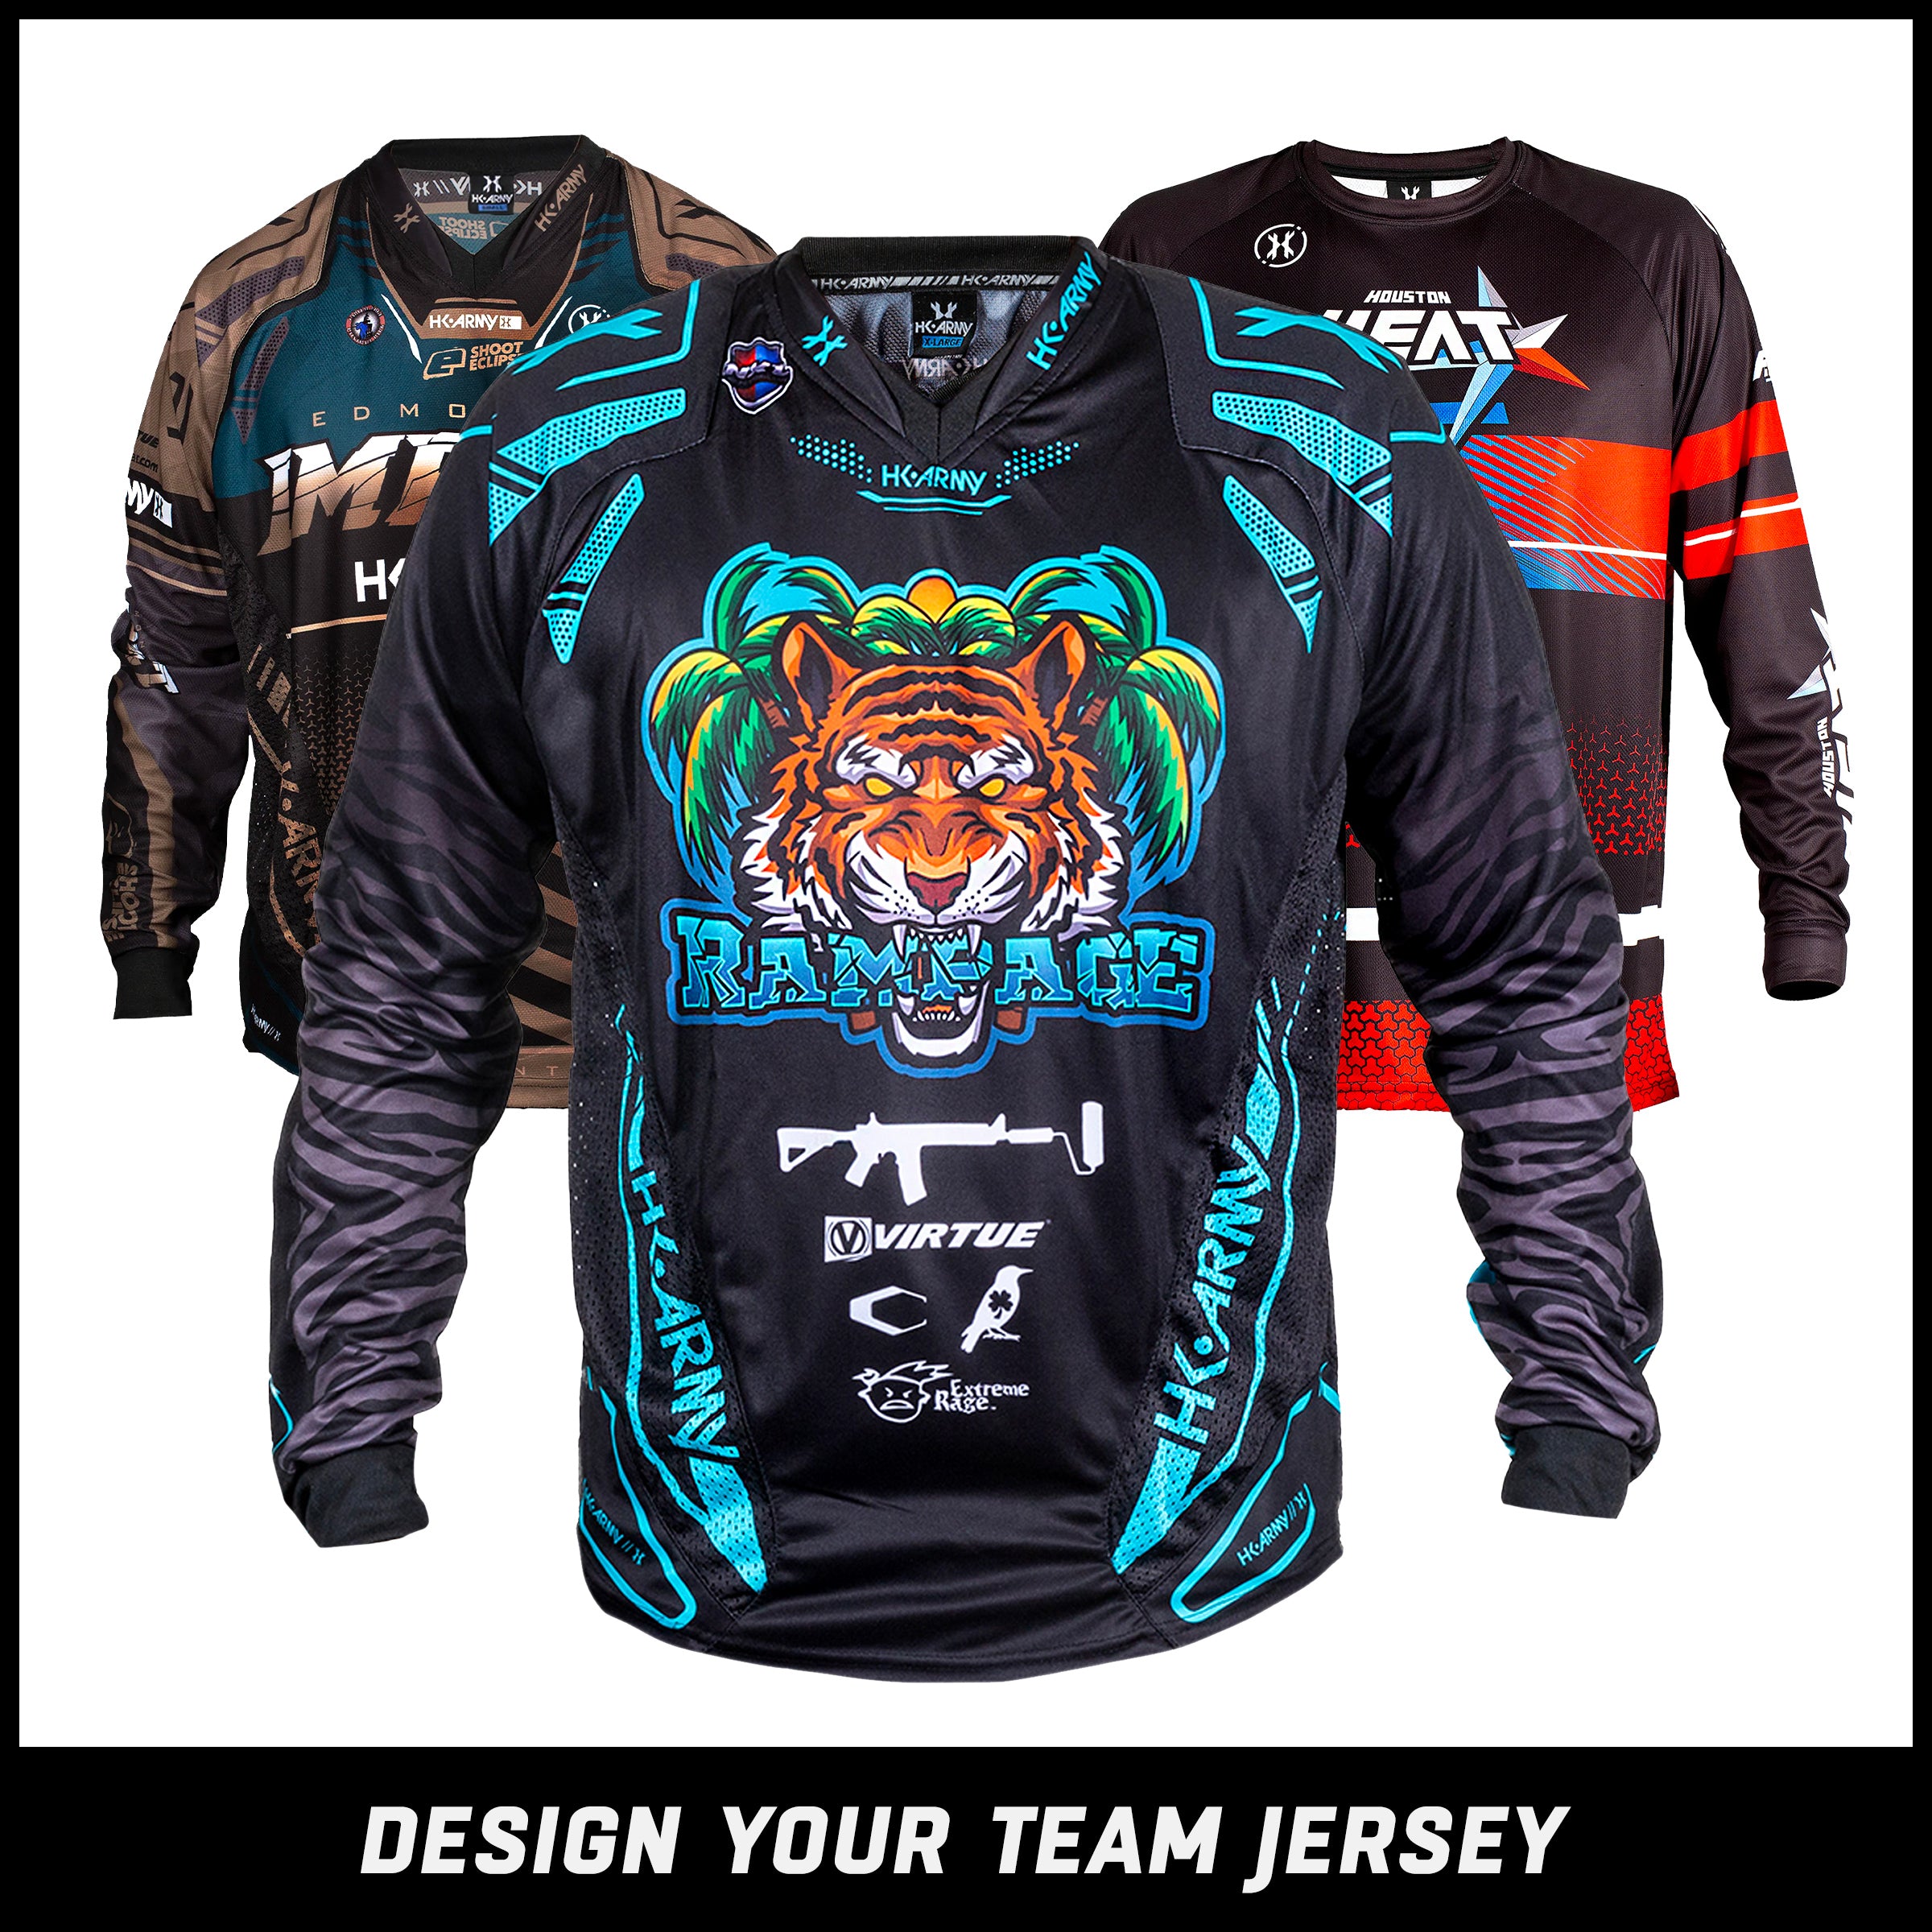 JT Paintball - This year's Leverage jerseys 🔥🔥 Thank you